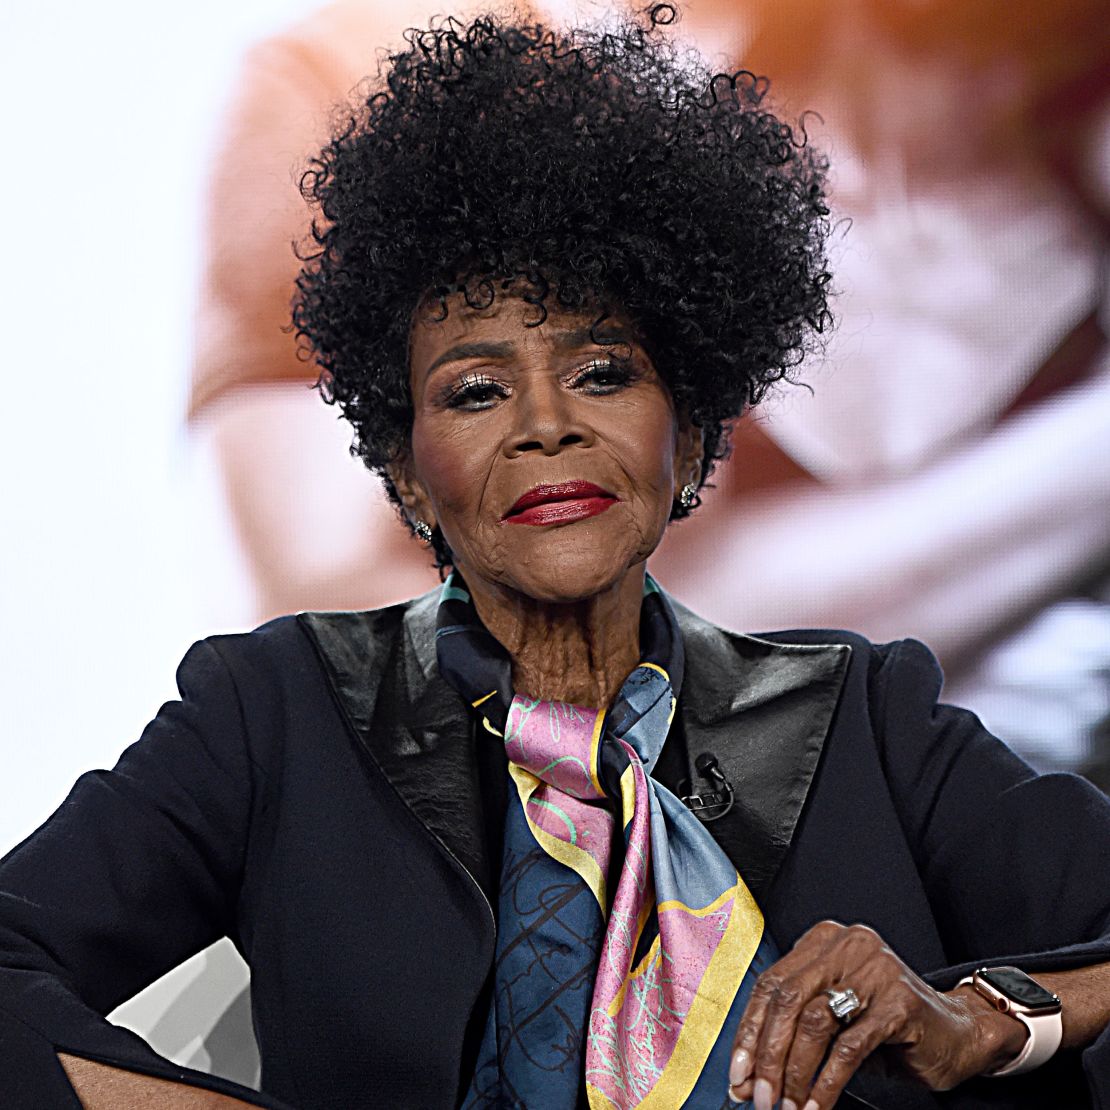 Cicely Tyson speaks at a panel in January 2020.